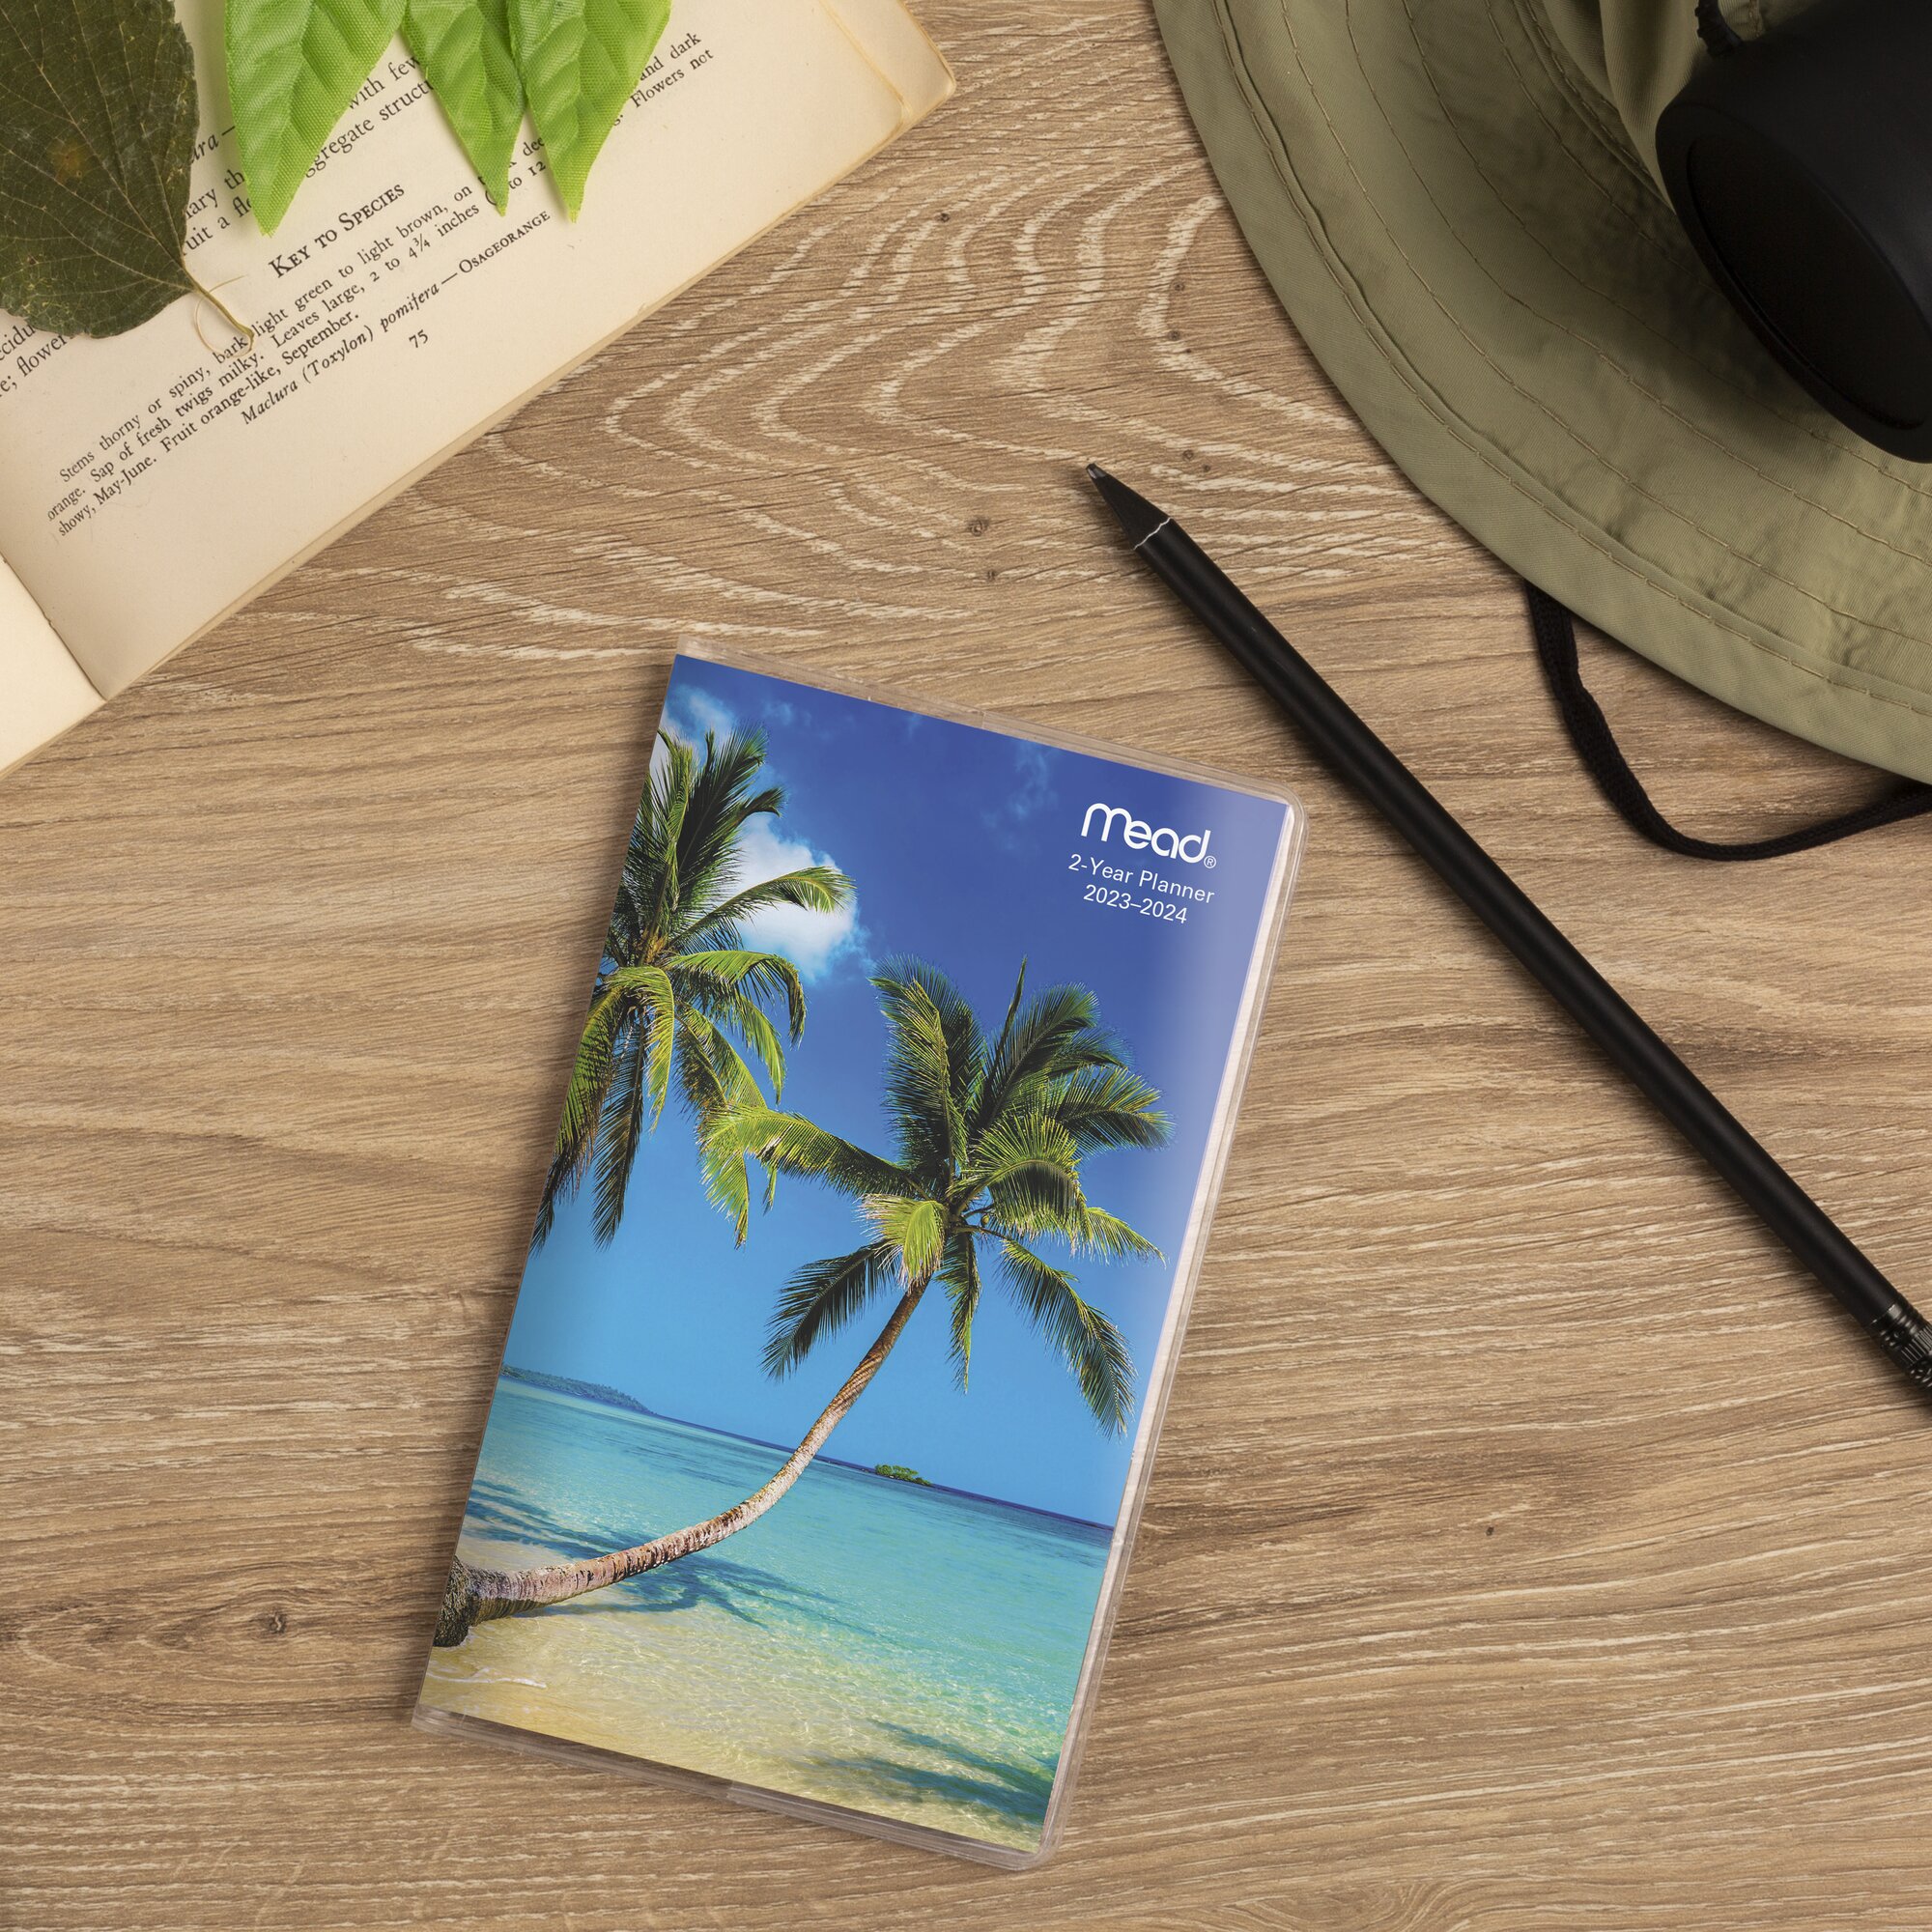 TROPICAL 2023-2024 TWO Year Monthly Pocket Planner - Pocket Planners $7